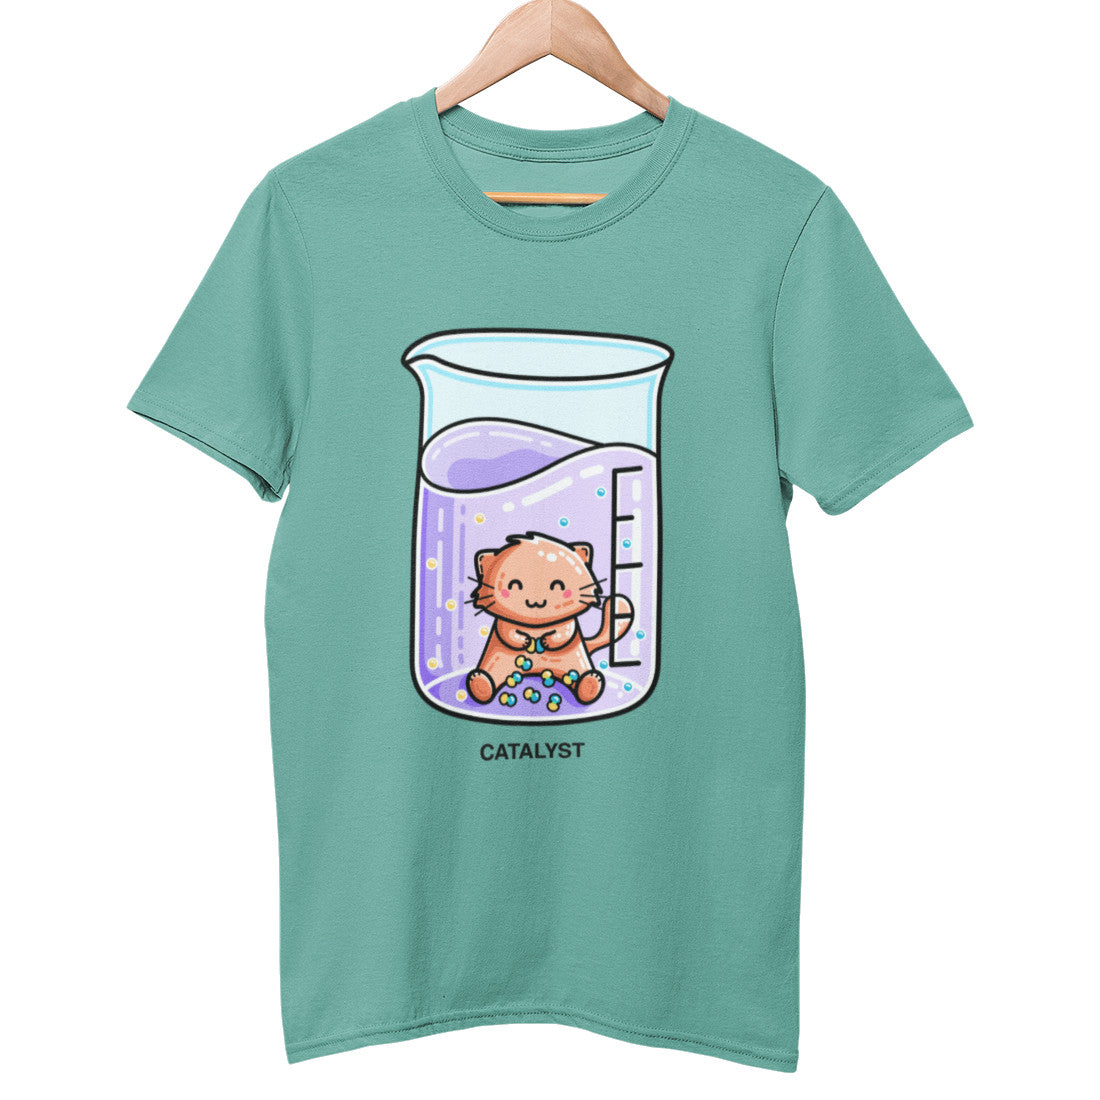 A green bay coloured unisex crewneck t-shirt on a hanger with a design on its chest of a cute ginger cat sitting in a chemistry beaker of purple liquid joining atoms or yellow and green together